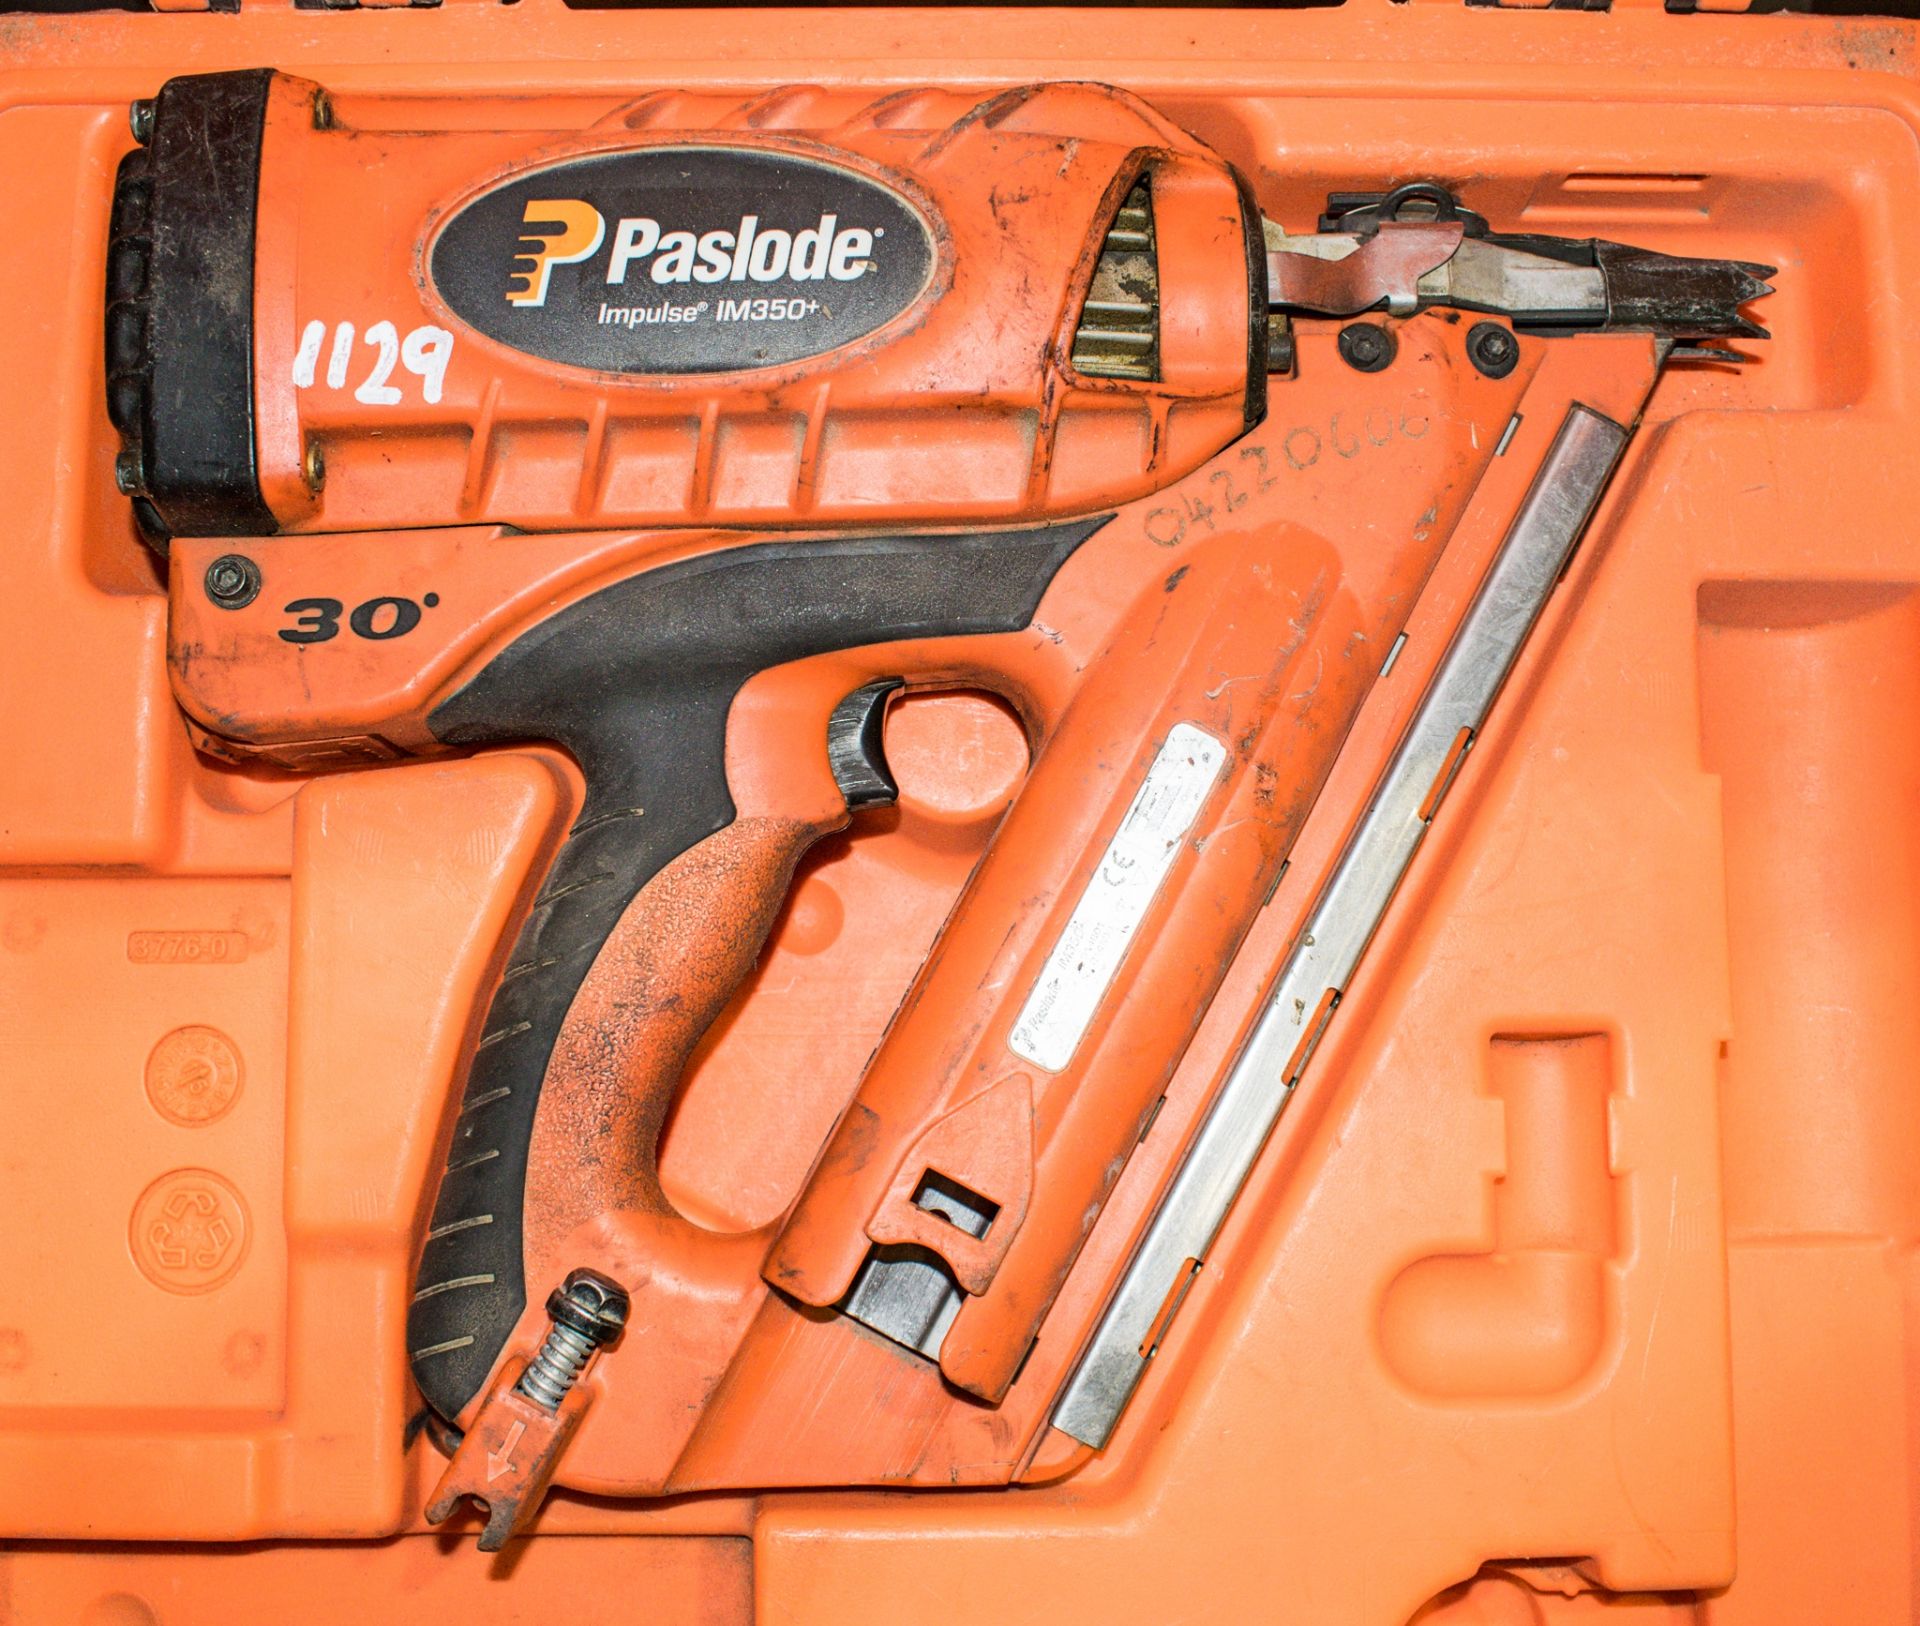 Paslode nail gun c/w carry case ** No battery or charger **